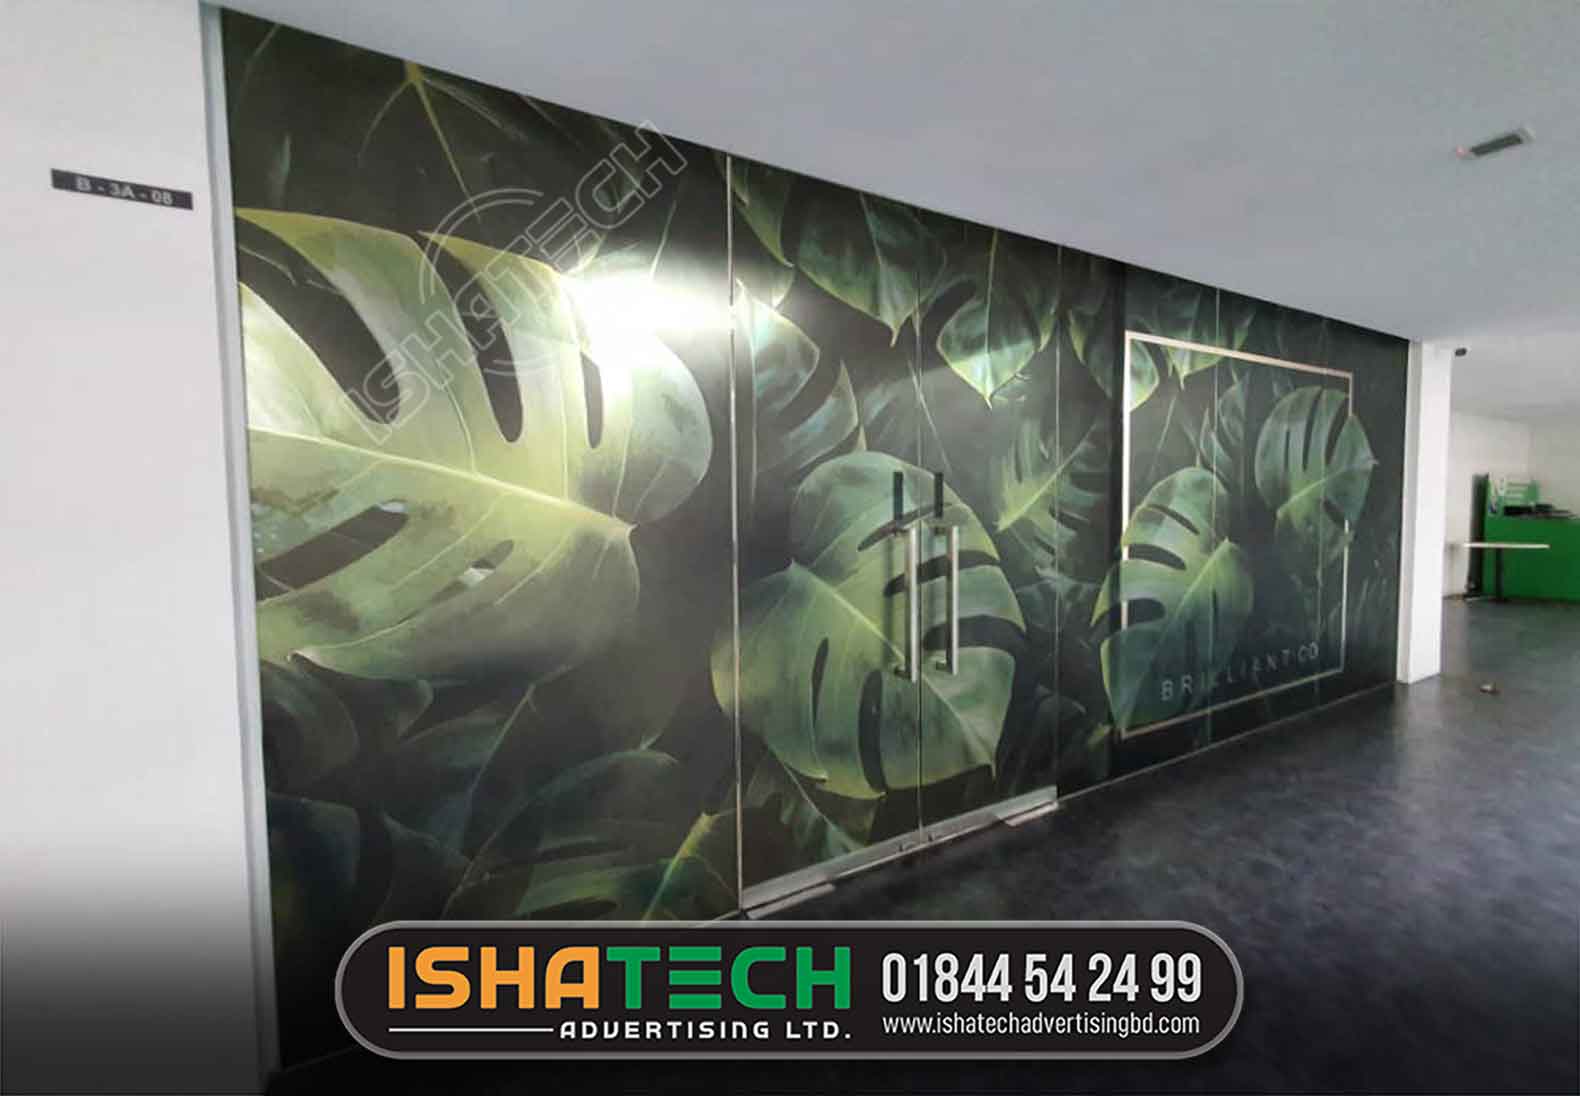 Ishatech Advertising is your primary destination for superb frosted acrylic glass services, specializing in the artful embellishment of places through the appeal of frosted acrylic glass. With meticulous application methods, our knowledgeable staff ensures flawless operation in each installation of frosted acrylic glass, bringing creations to life. Experience the adaptability of our frosted acrylic for glass; every pattern has been carefully chosen to go with a variety of tastes and styles. You can rely on us to provide you with unmatched frosted acrylic glass services that perfectly balance privacy and style to improve the environment around you.